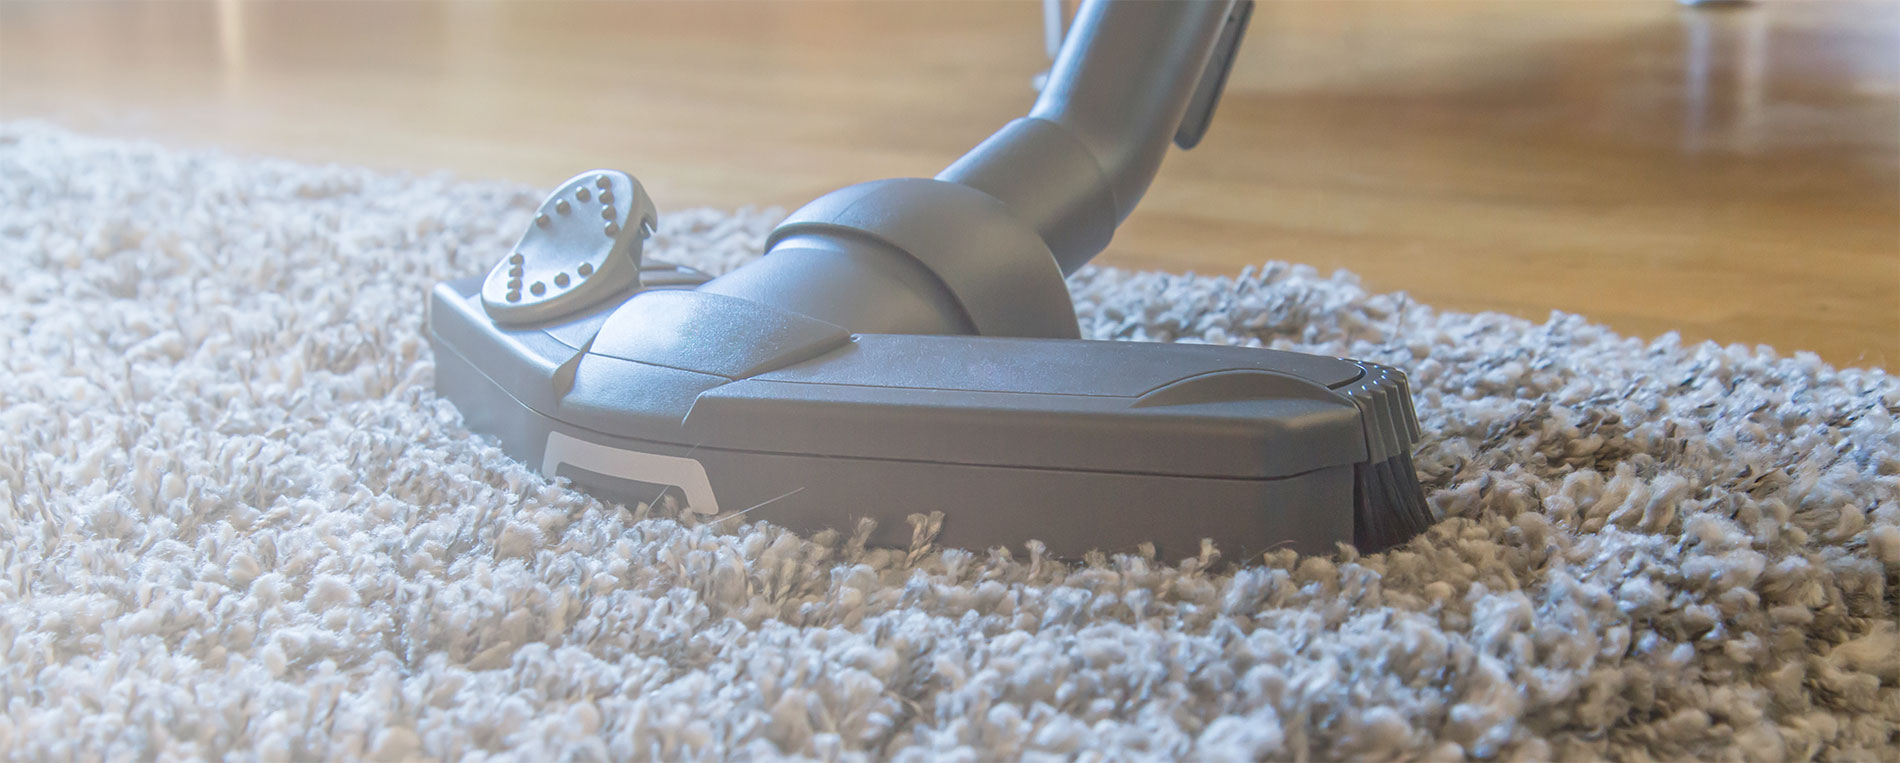 Professional Home Vacuum Cleaning Tips